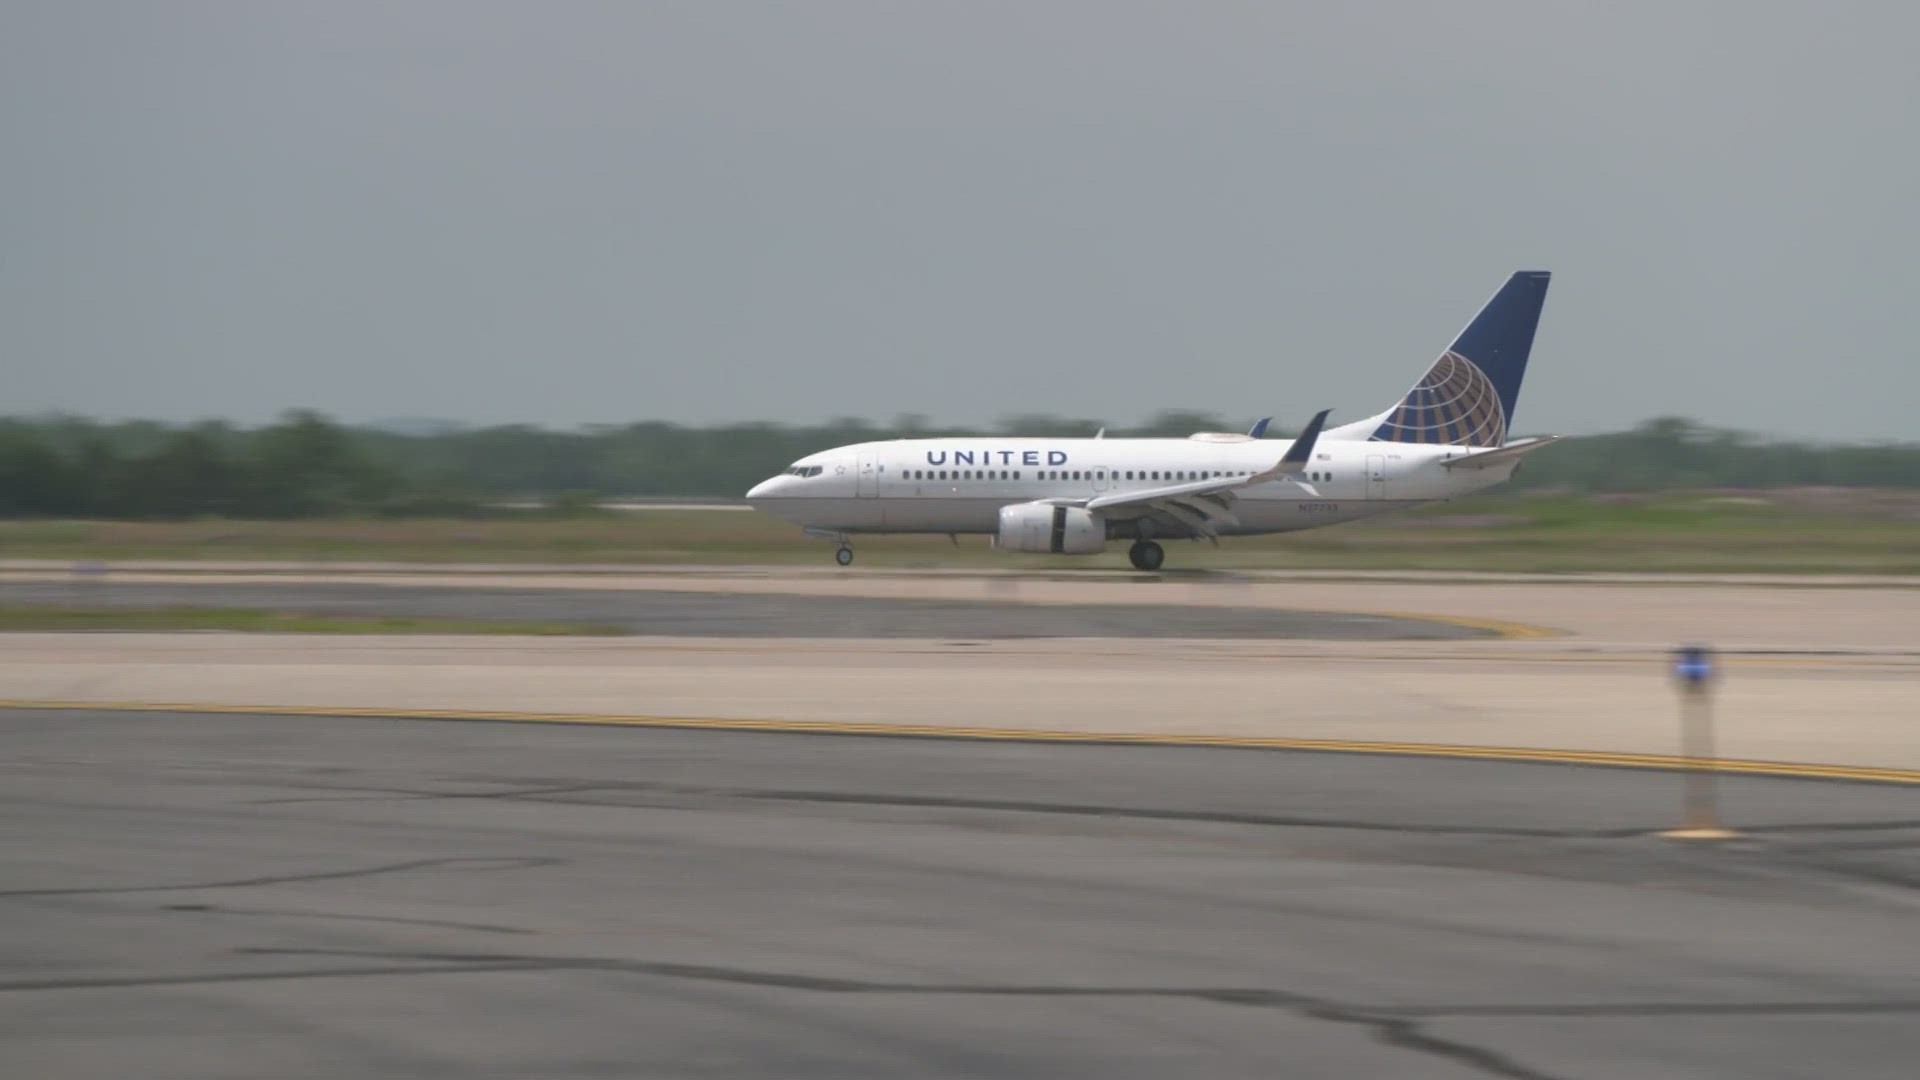 Federal officials said United crews had been unable to contact airline dispatchers through normal means.